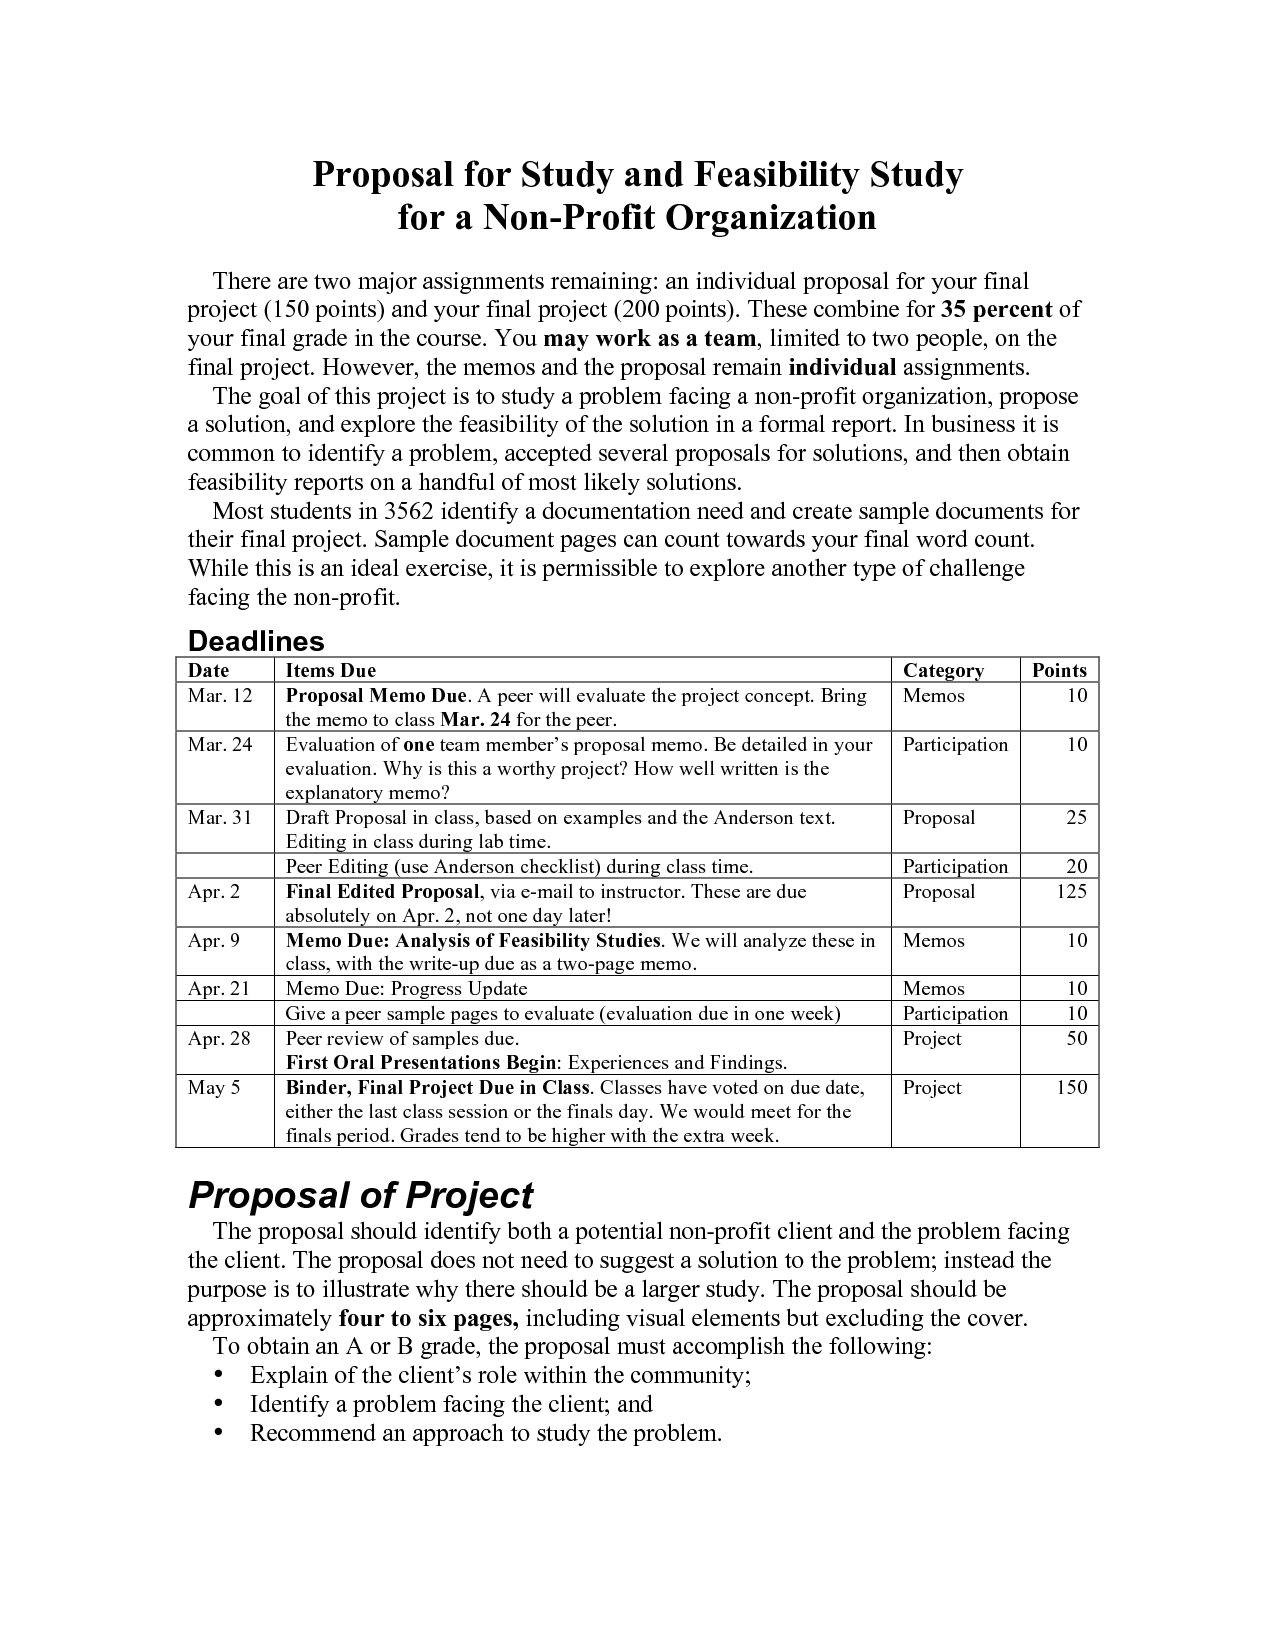 Sample Business Proposal For Non Profit Organization Within Non Profit Proposal Template